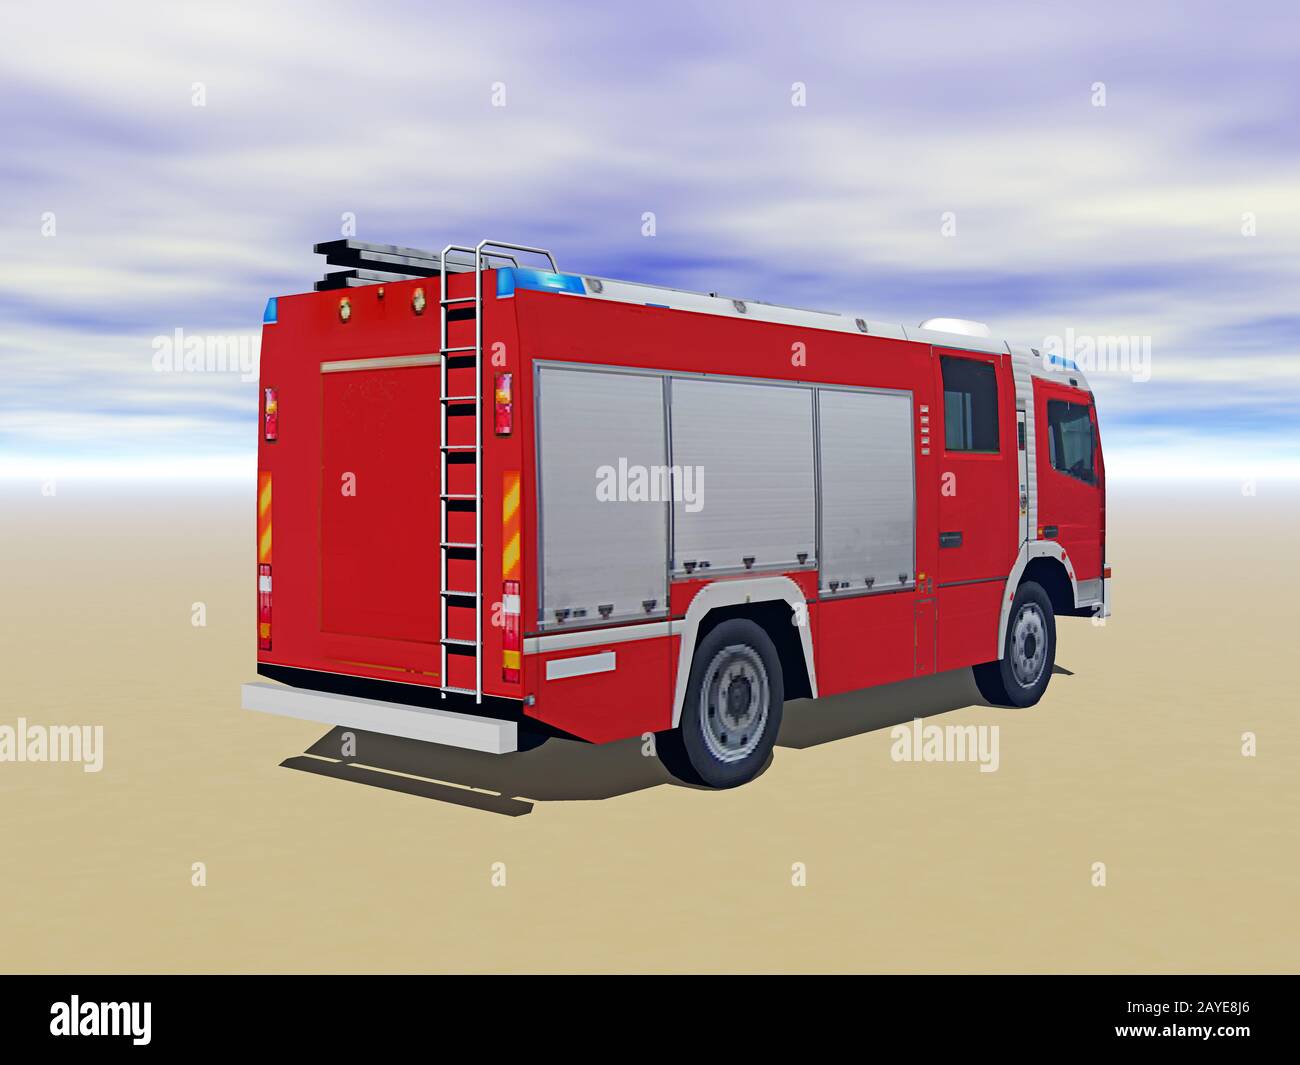 red fire truck vehicle with ladder Stock Photo